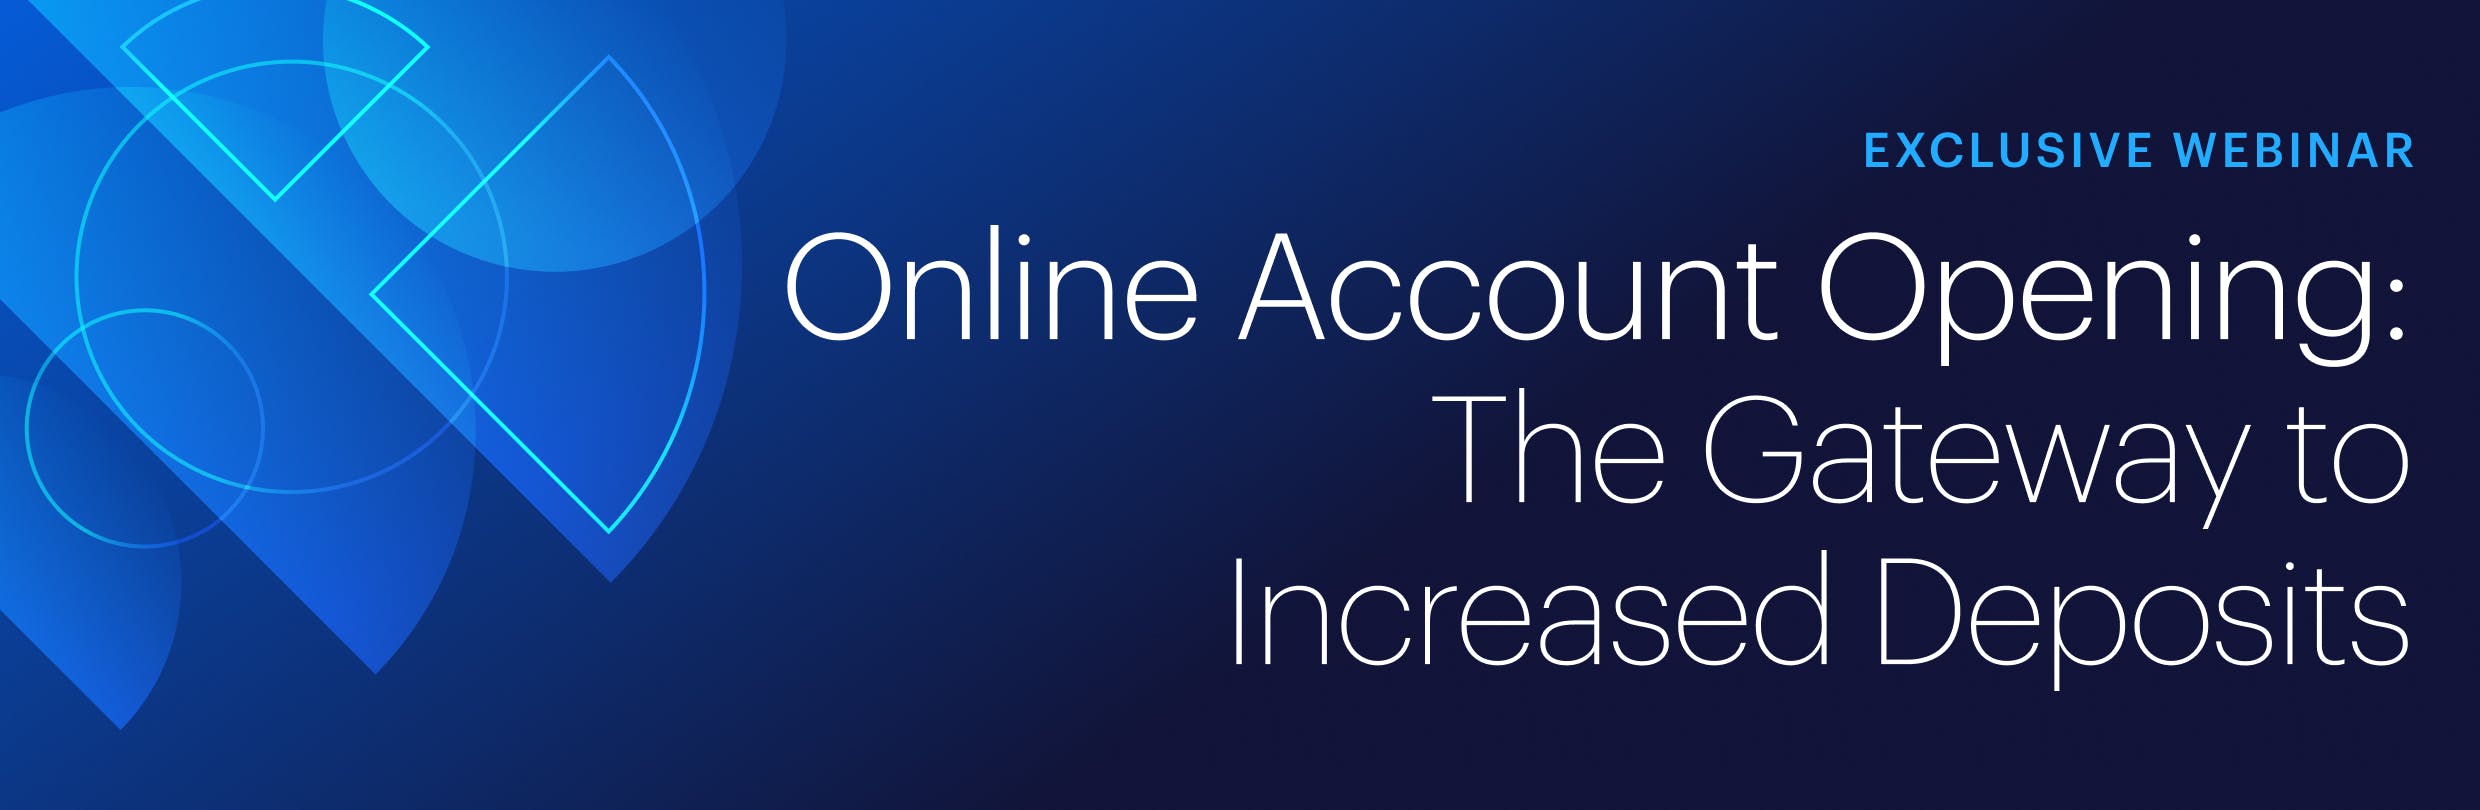 Exclusive Webinar - Online Account Opening: The Gateway to Increased Deposits